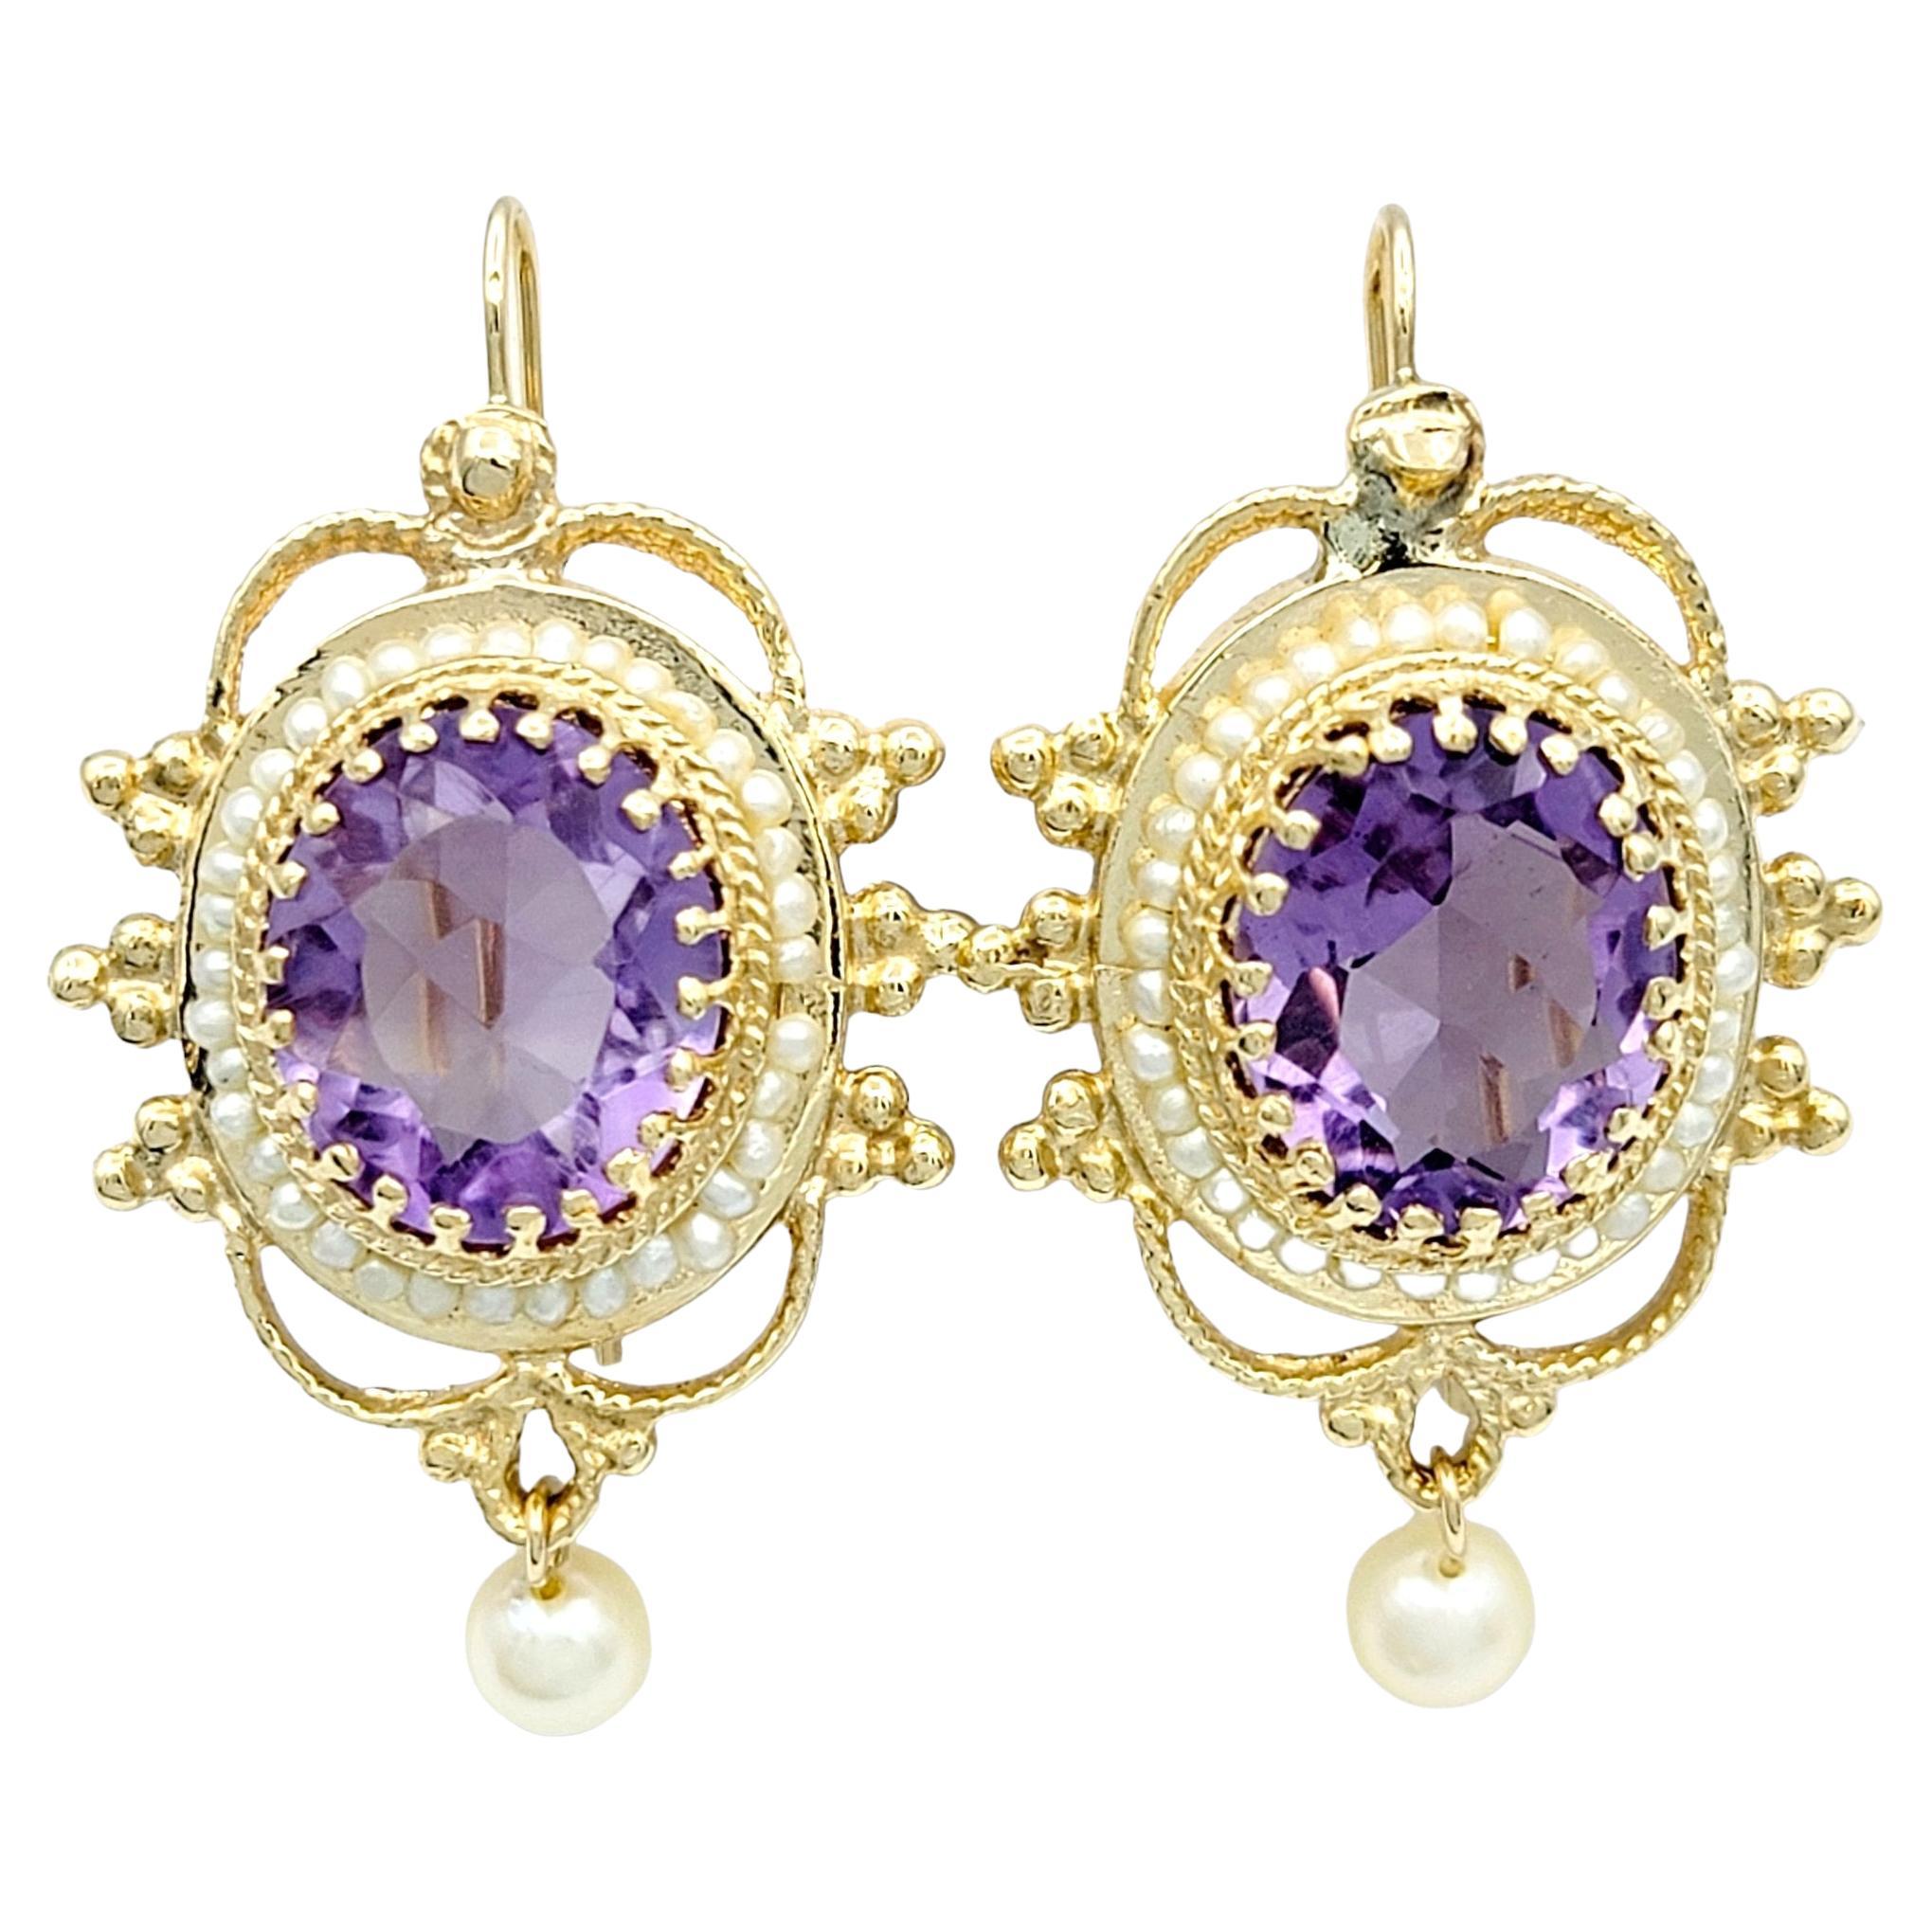 Oval Amethyst and Seed Pearl Halo Dangle Earrings Set in 14 Karat Yellow Gold